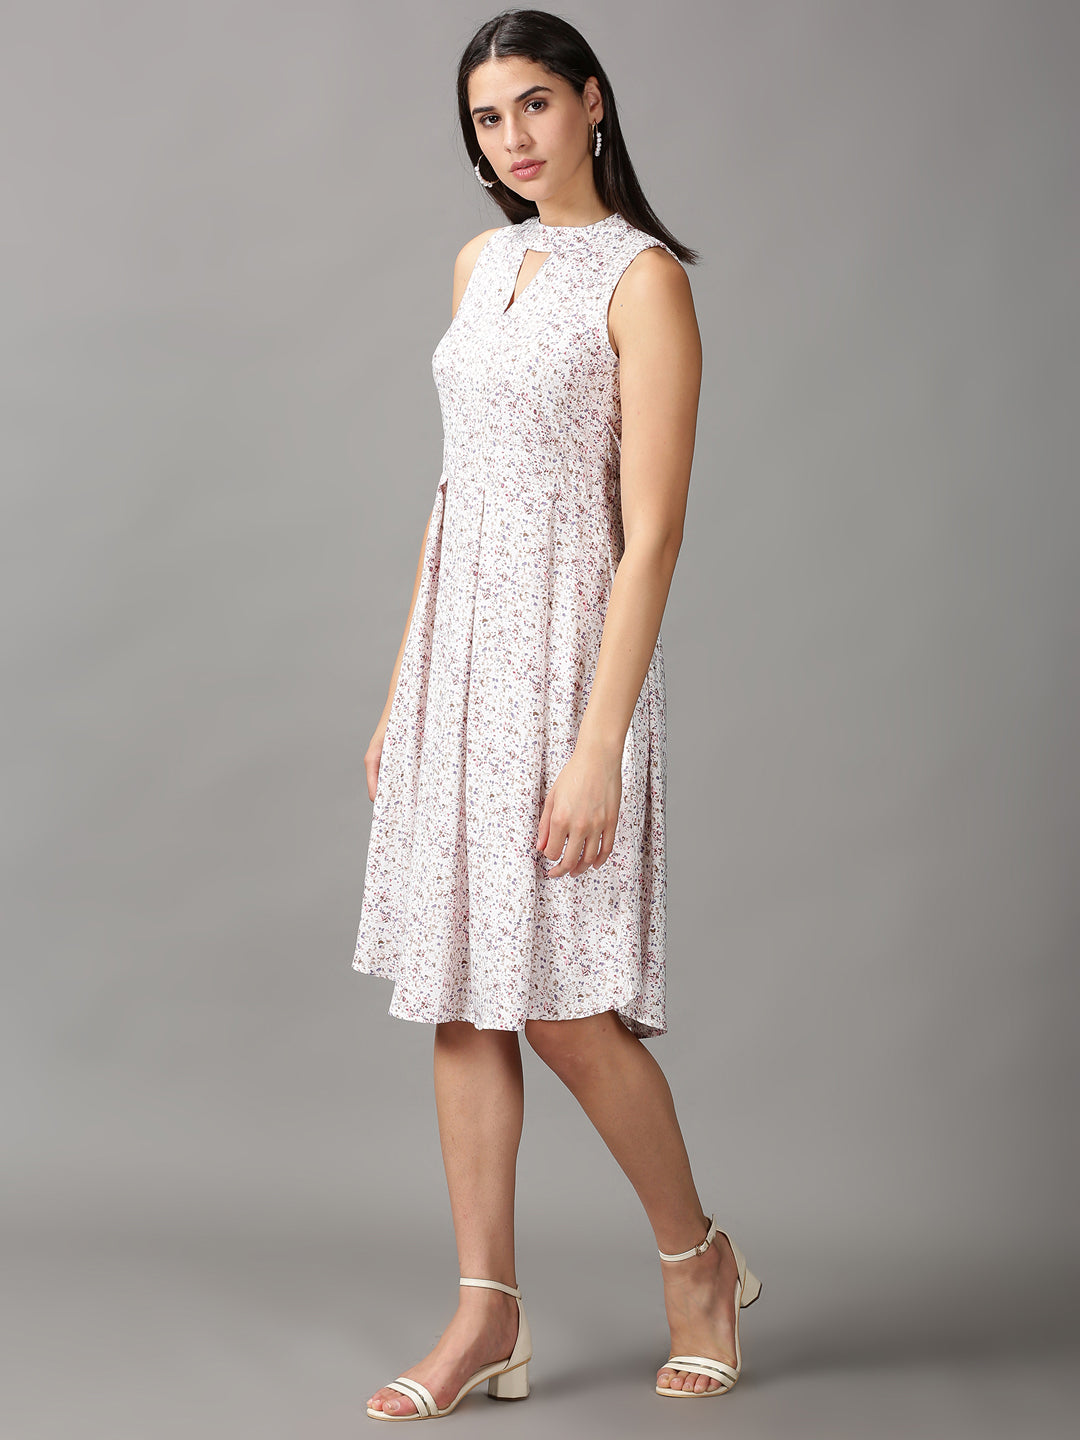 Women's White Floral Fit and Flare Dress